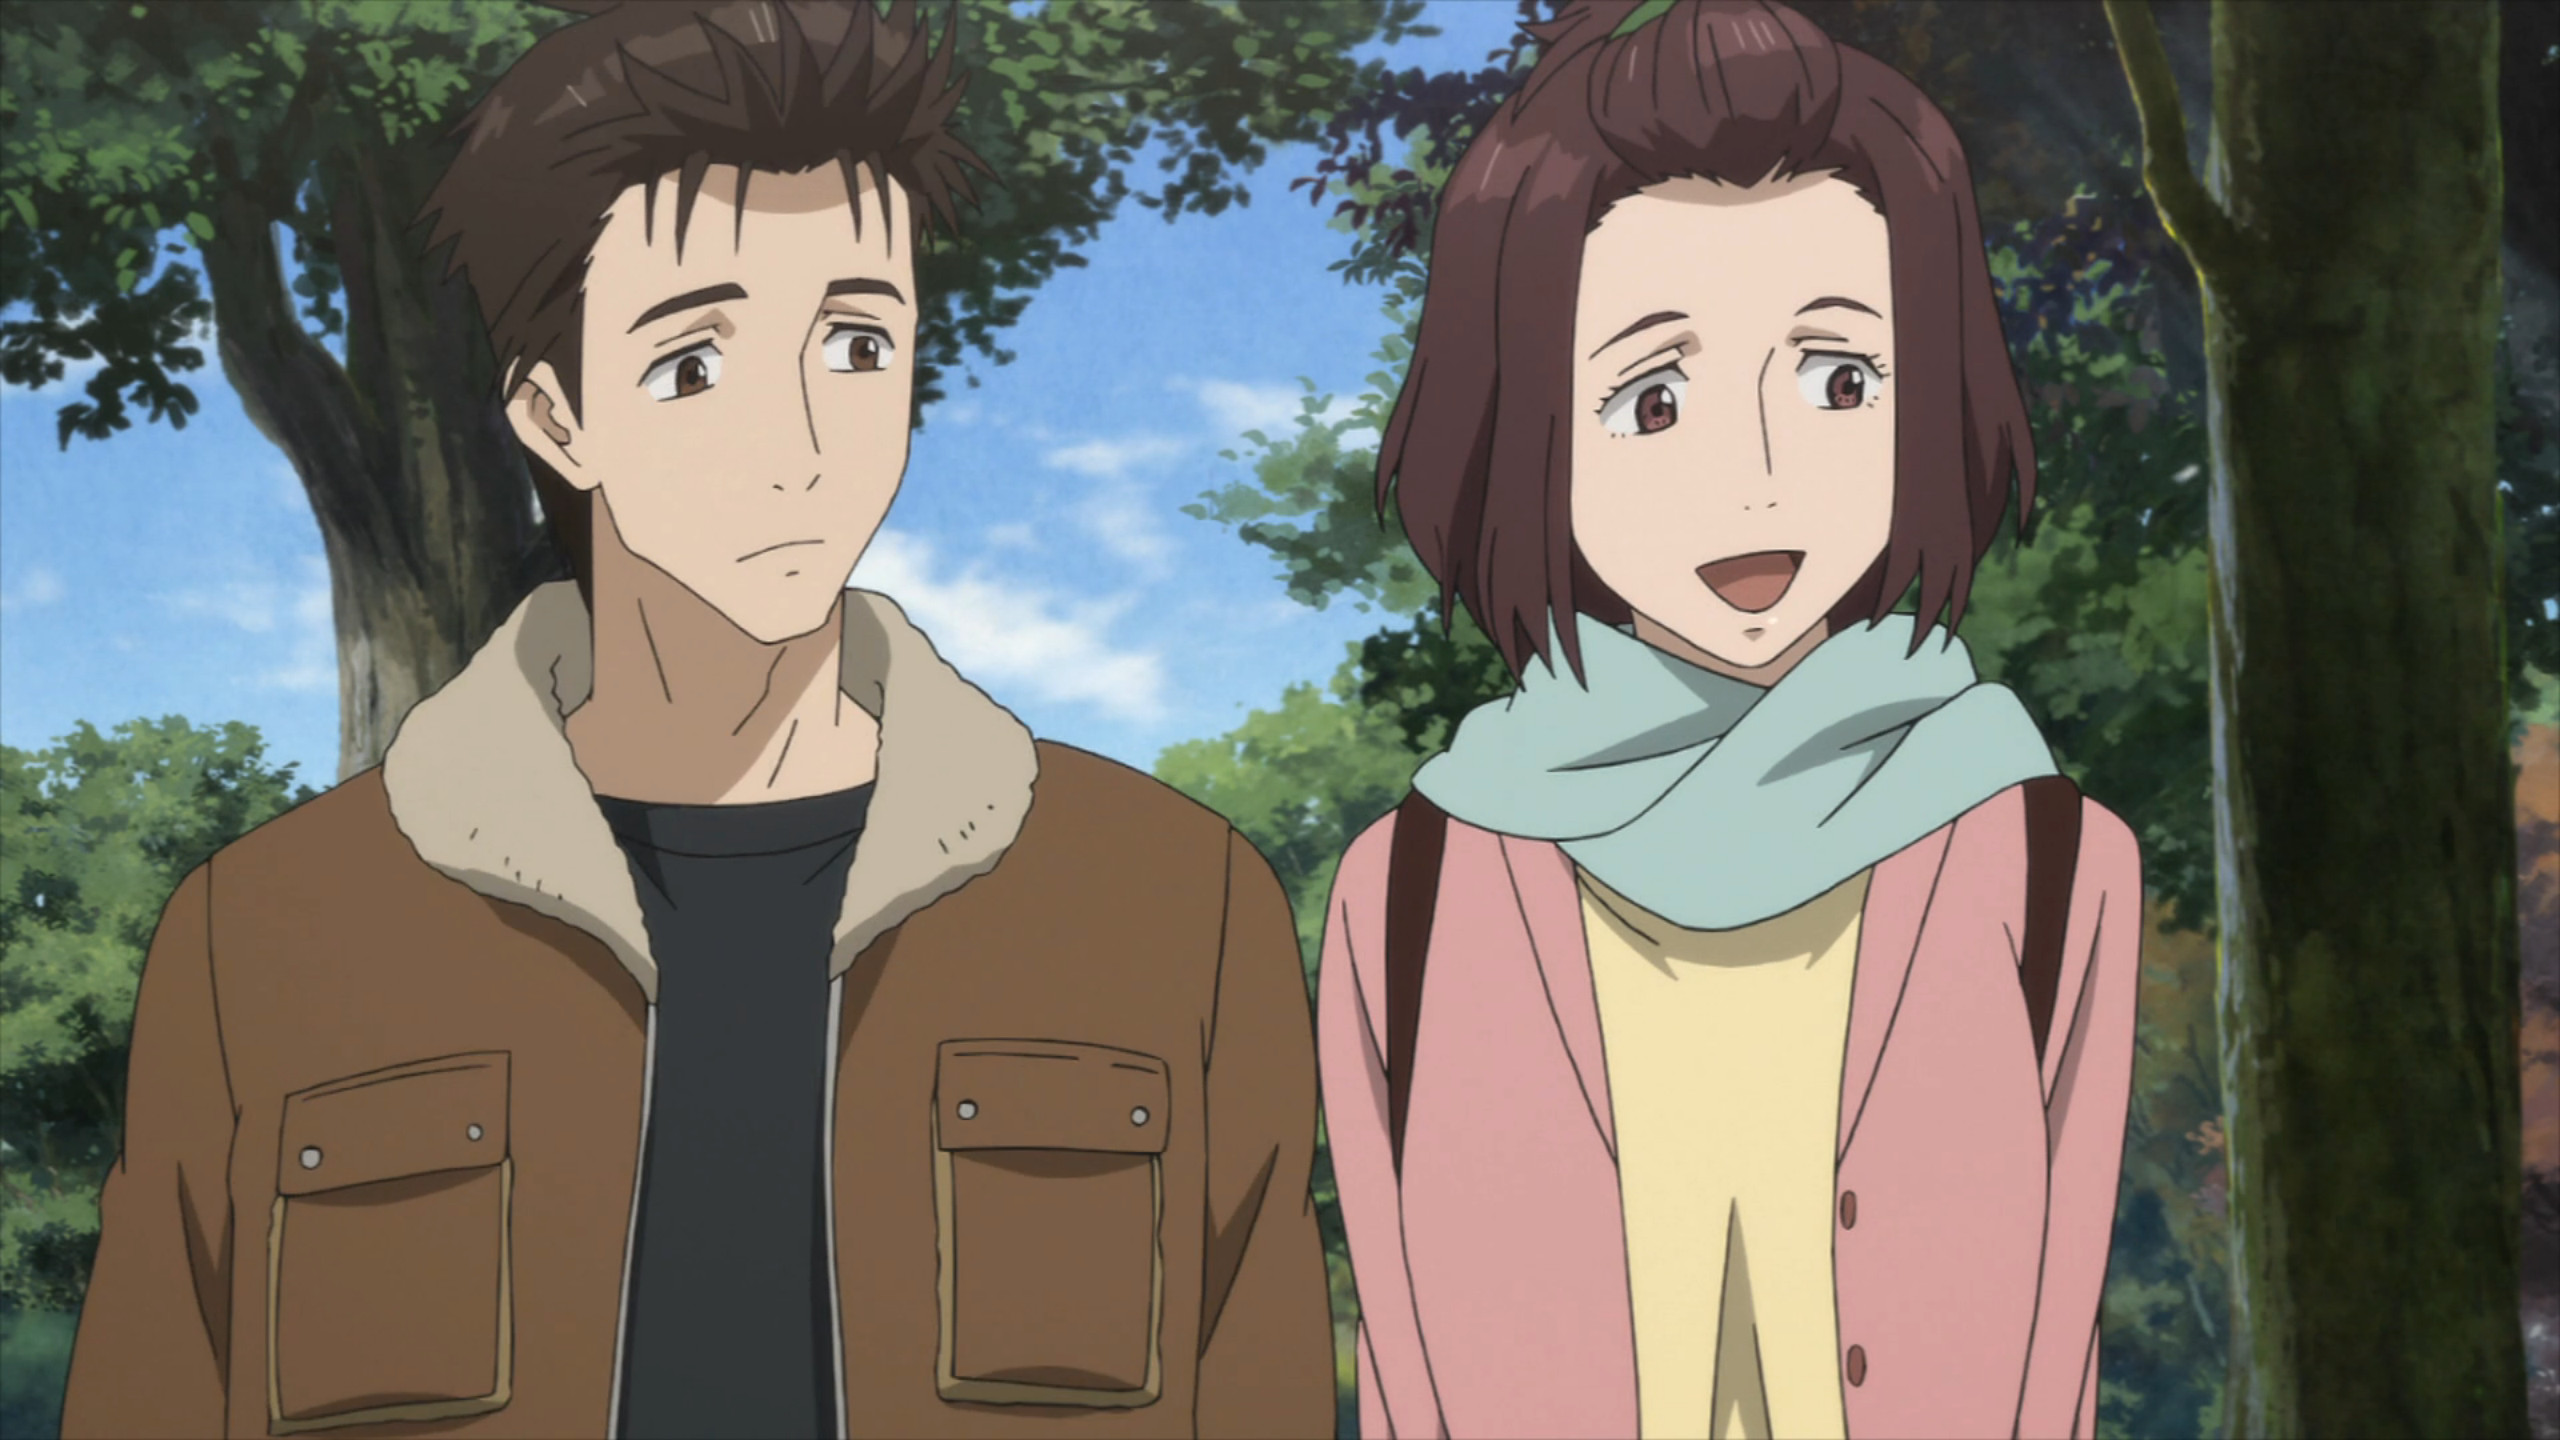 2560x1440 Anime Couples That Make You Believe in Love Again - Sentai .